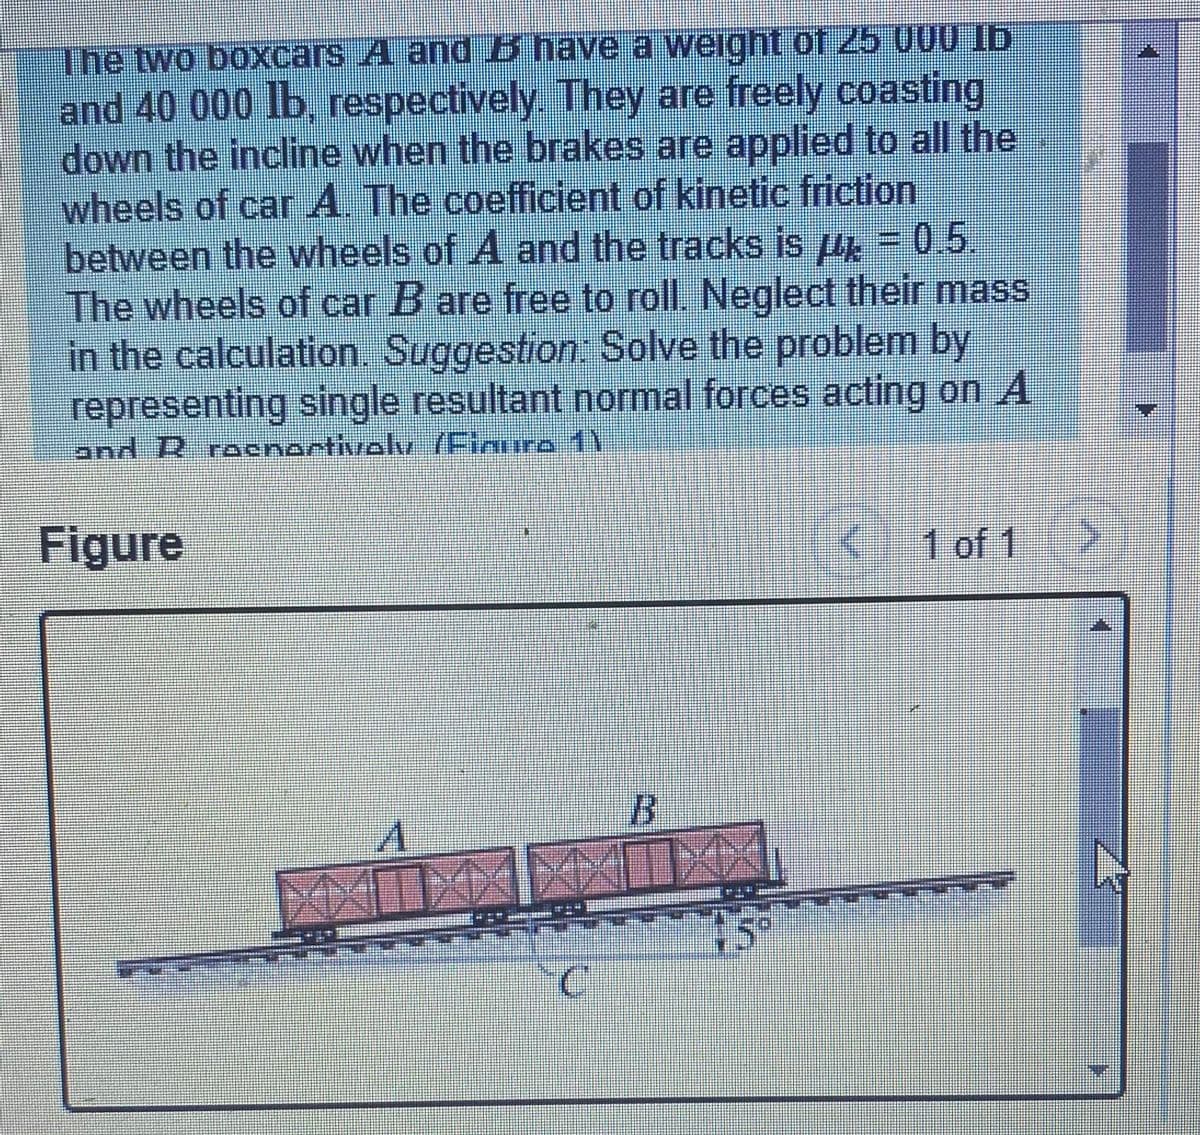 The two boxcars A and B have a weight of 25 U00 Ib
and 40 000 lb. respectively They are freely coasting
down the incline when the brakes are applied to all the
wheels of car A. The coefficient of kinetic friction
between the wheels of A and the tracks is u = 0.5.
The wheels of car B are free to roll. Neglect their mass
in the calculation. Suggestion: Solve the problem by
representing single resultant normal forces acting on A
and 12 rocnortivolv (Finure 1V
Figure
1 of 1>
